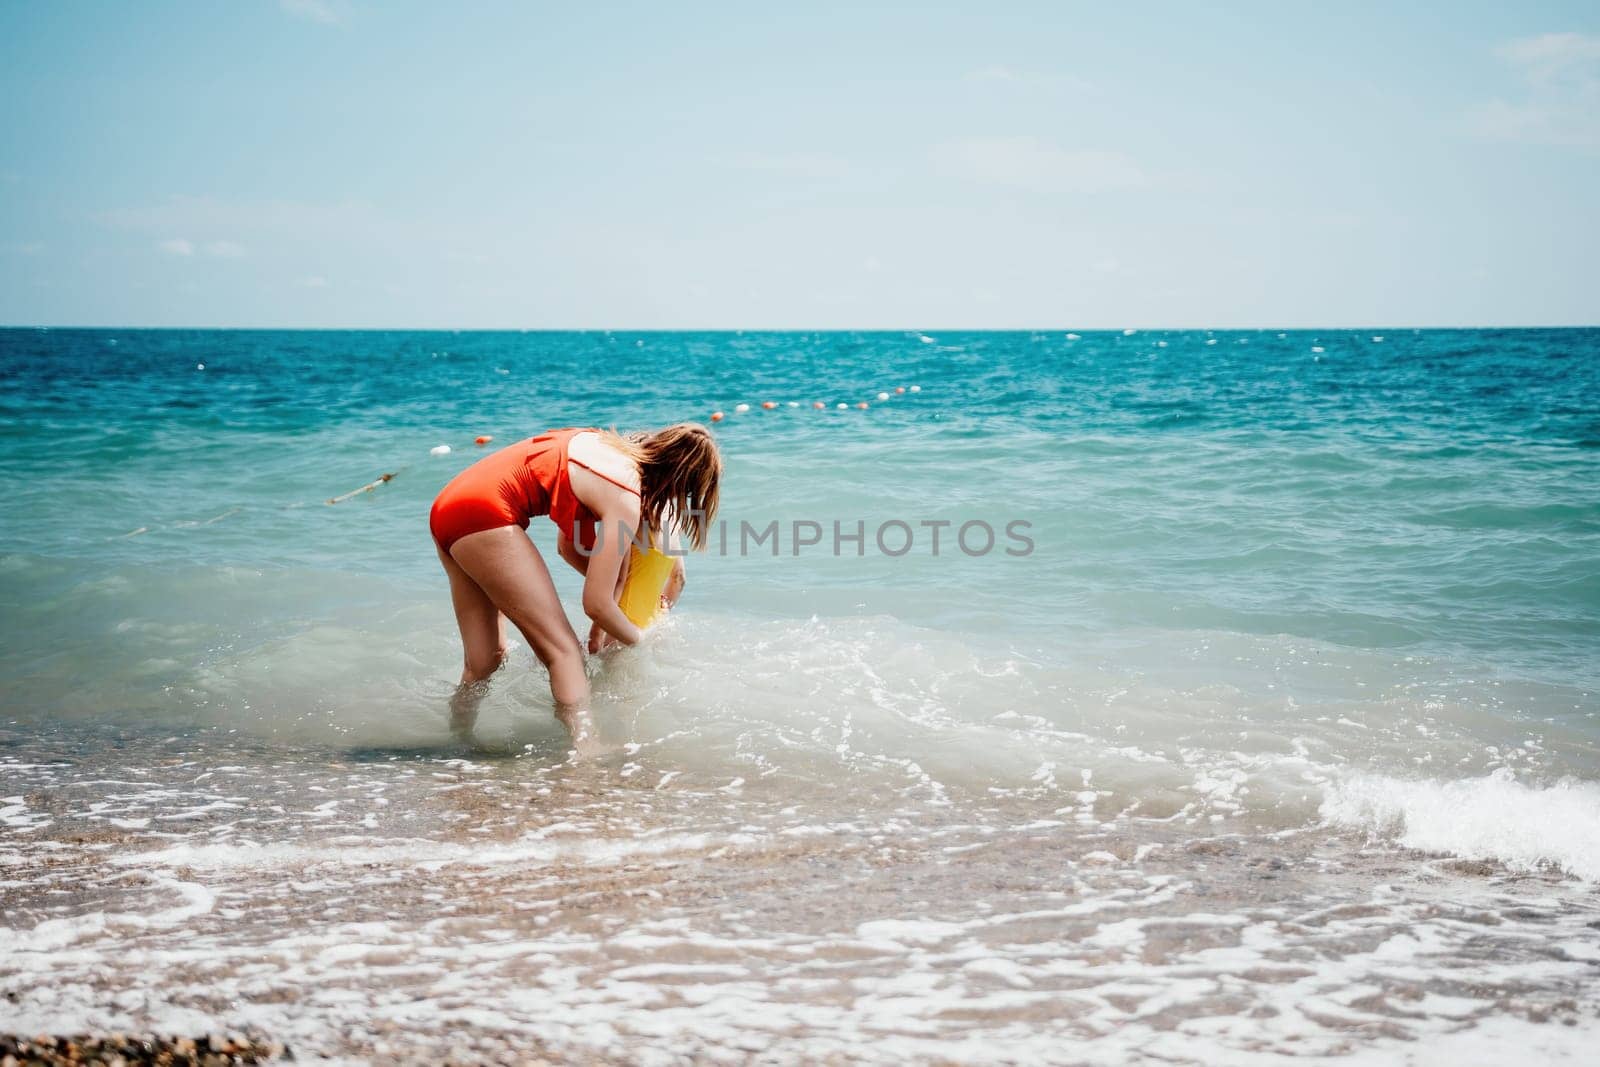 Happy loving family mother and daughter having fun together on the beach. Mum playing with her kid in holiday vacation next to the ocean - Family lifestyle and love concept by panophotograph